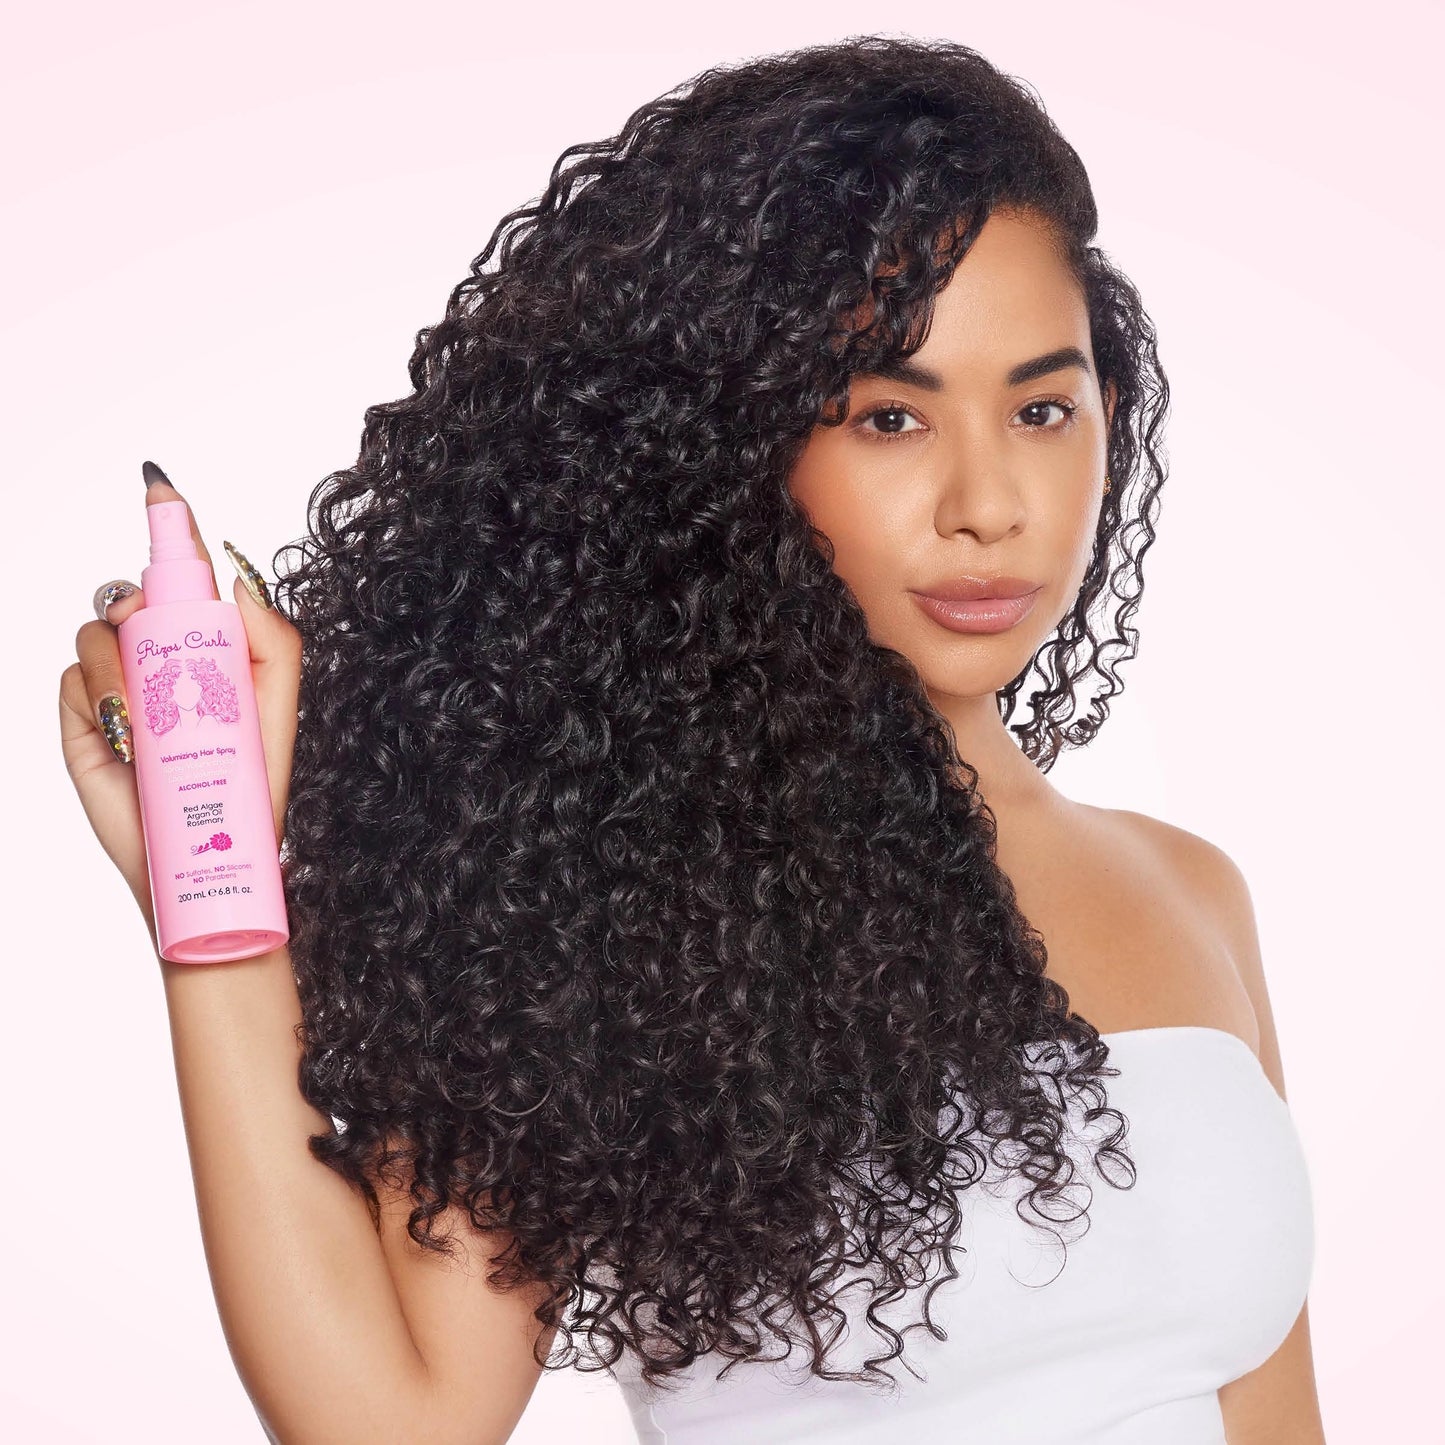 Rizos Curls Alcohol-Free Volumizing Hair Spray, Locks Hold & Style, Touchable Hold Without Crunch or Flakes, Infused with Rosemary, Argan Oil & Red Algae, 6.8 oz